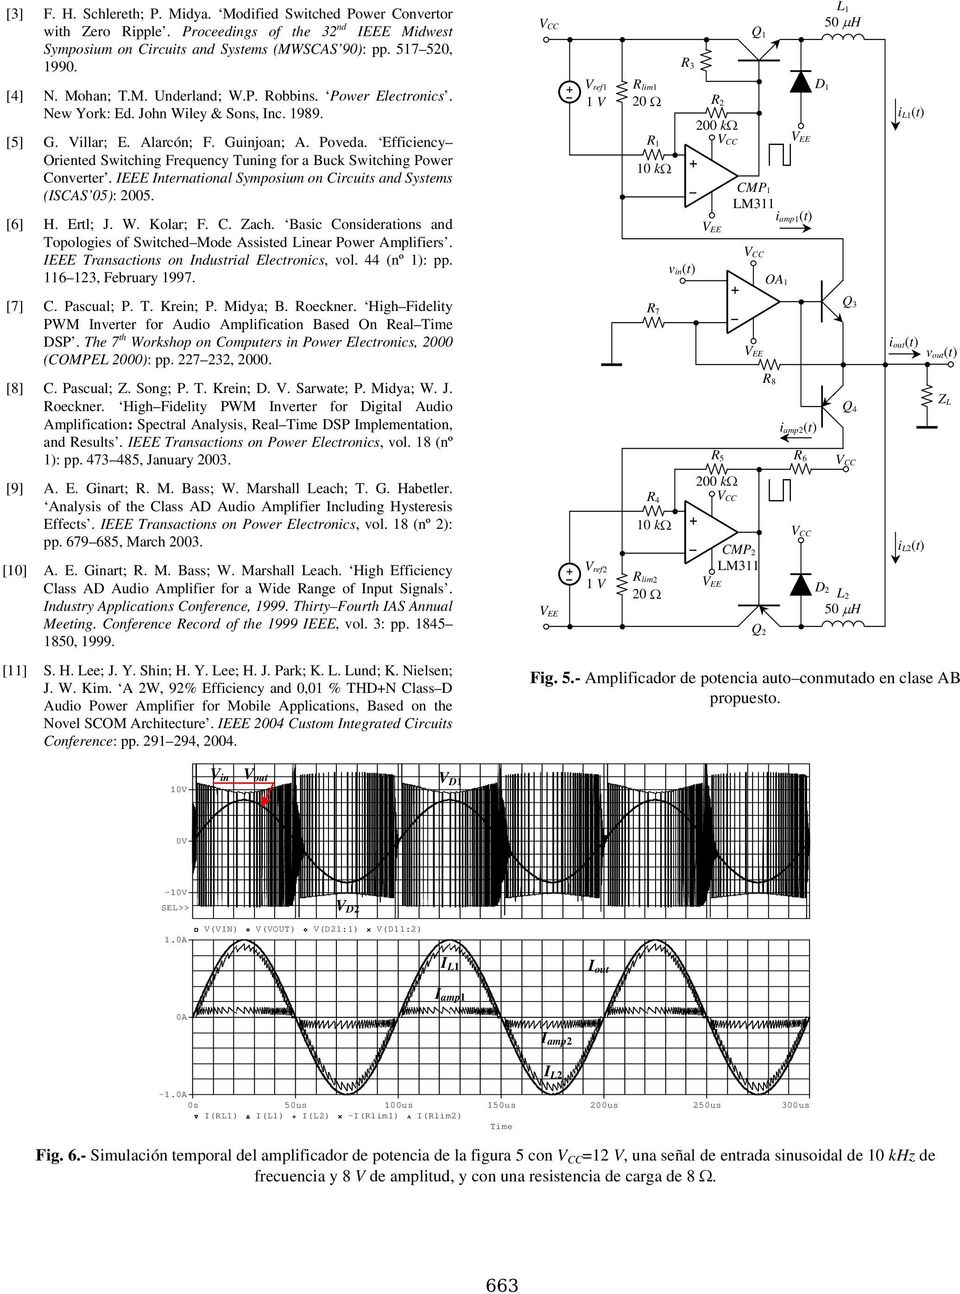 Efficiency Oriented Switching Frequency Tuning for a Buck Switching Power Converter. IEEE International Symposium on Circuits and Systems (ISCAS 05): 2005. [6] H. Ertl; J. W. Kolar; F. C. Zach.